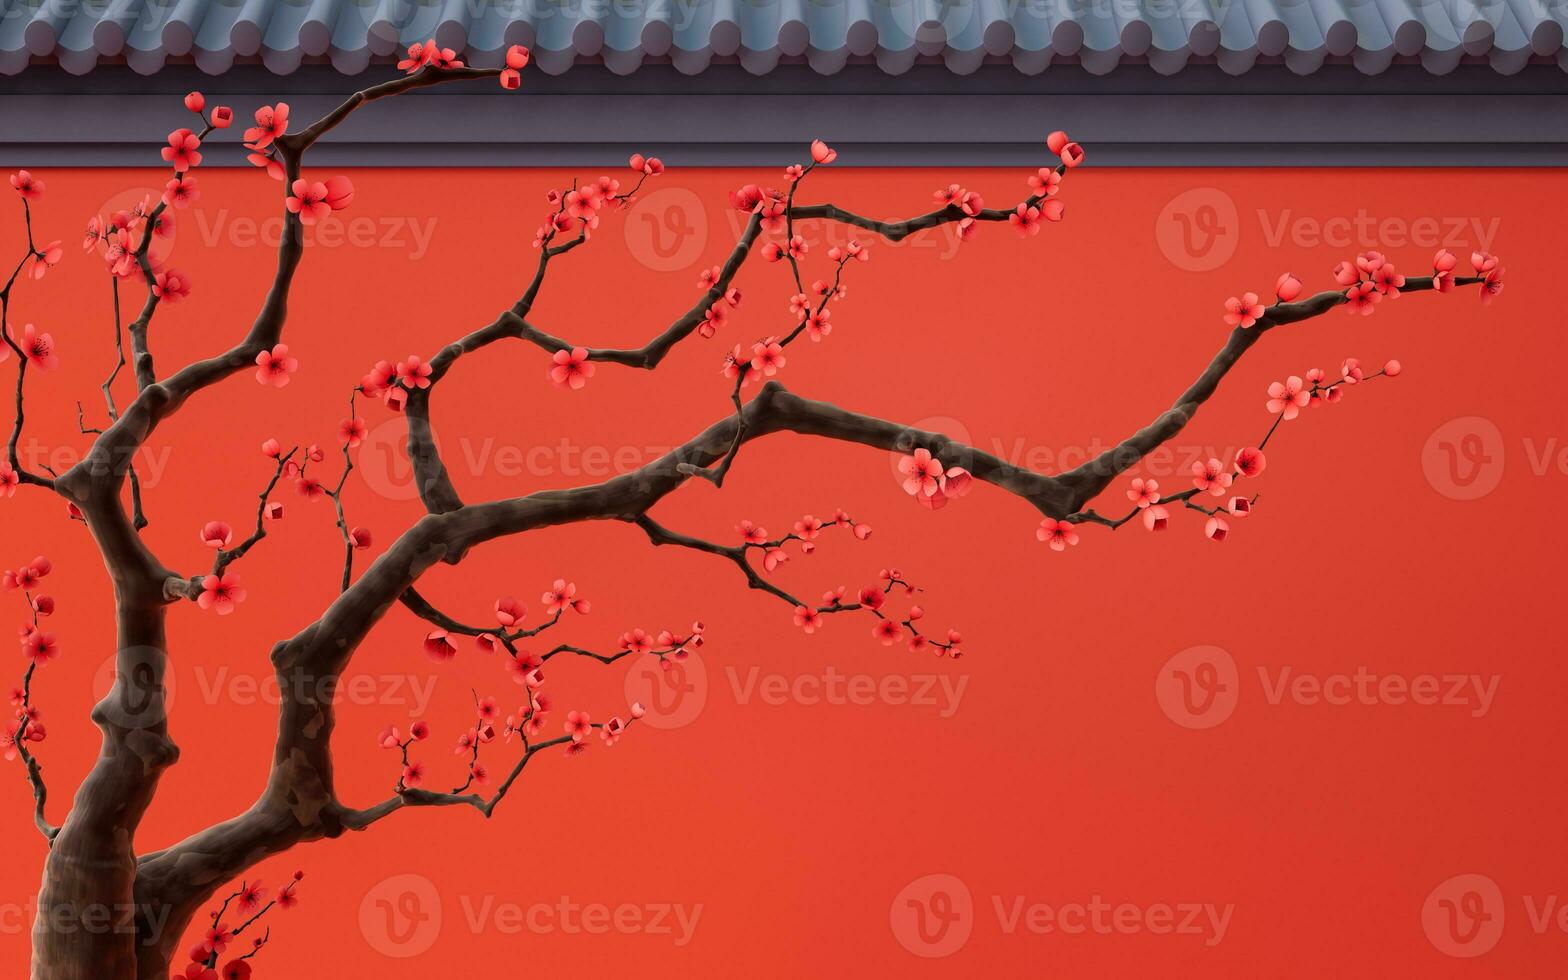 Plum blossom with Chinese ancient wall, 3d rendering. photo